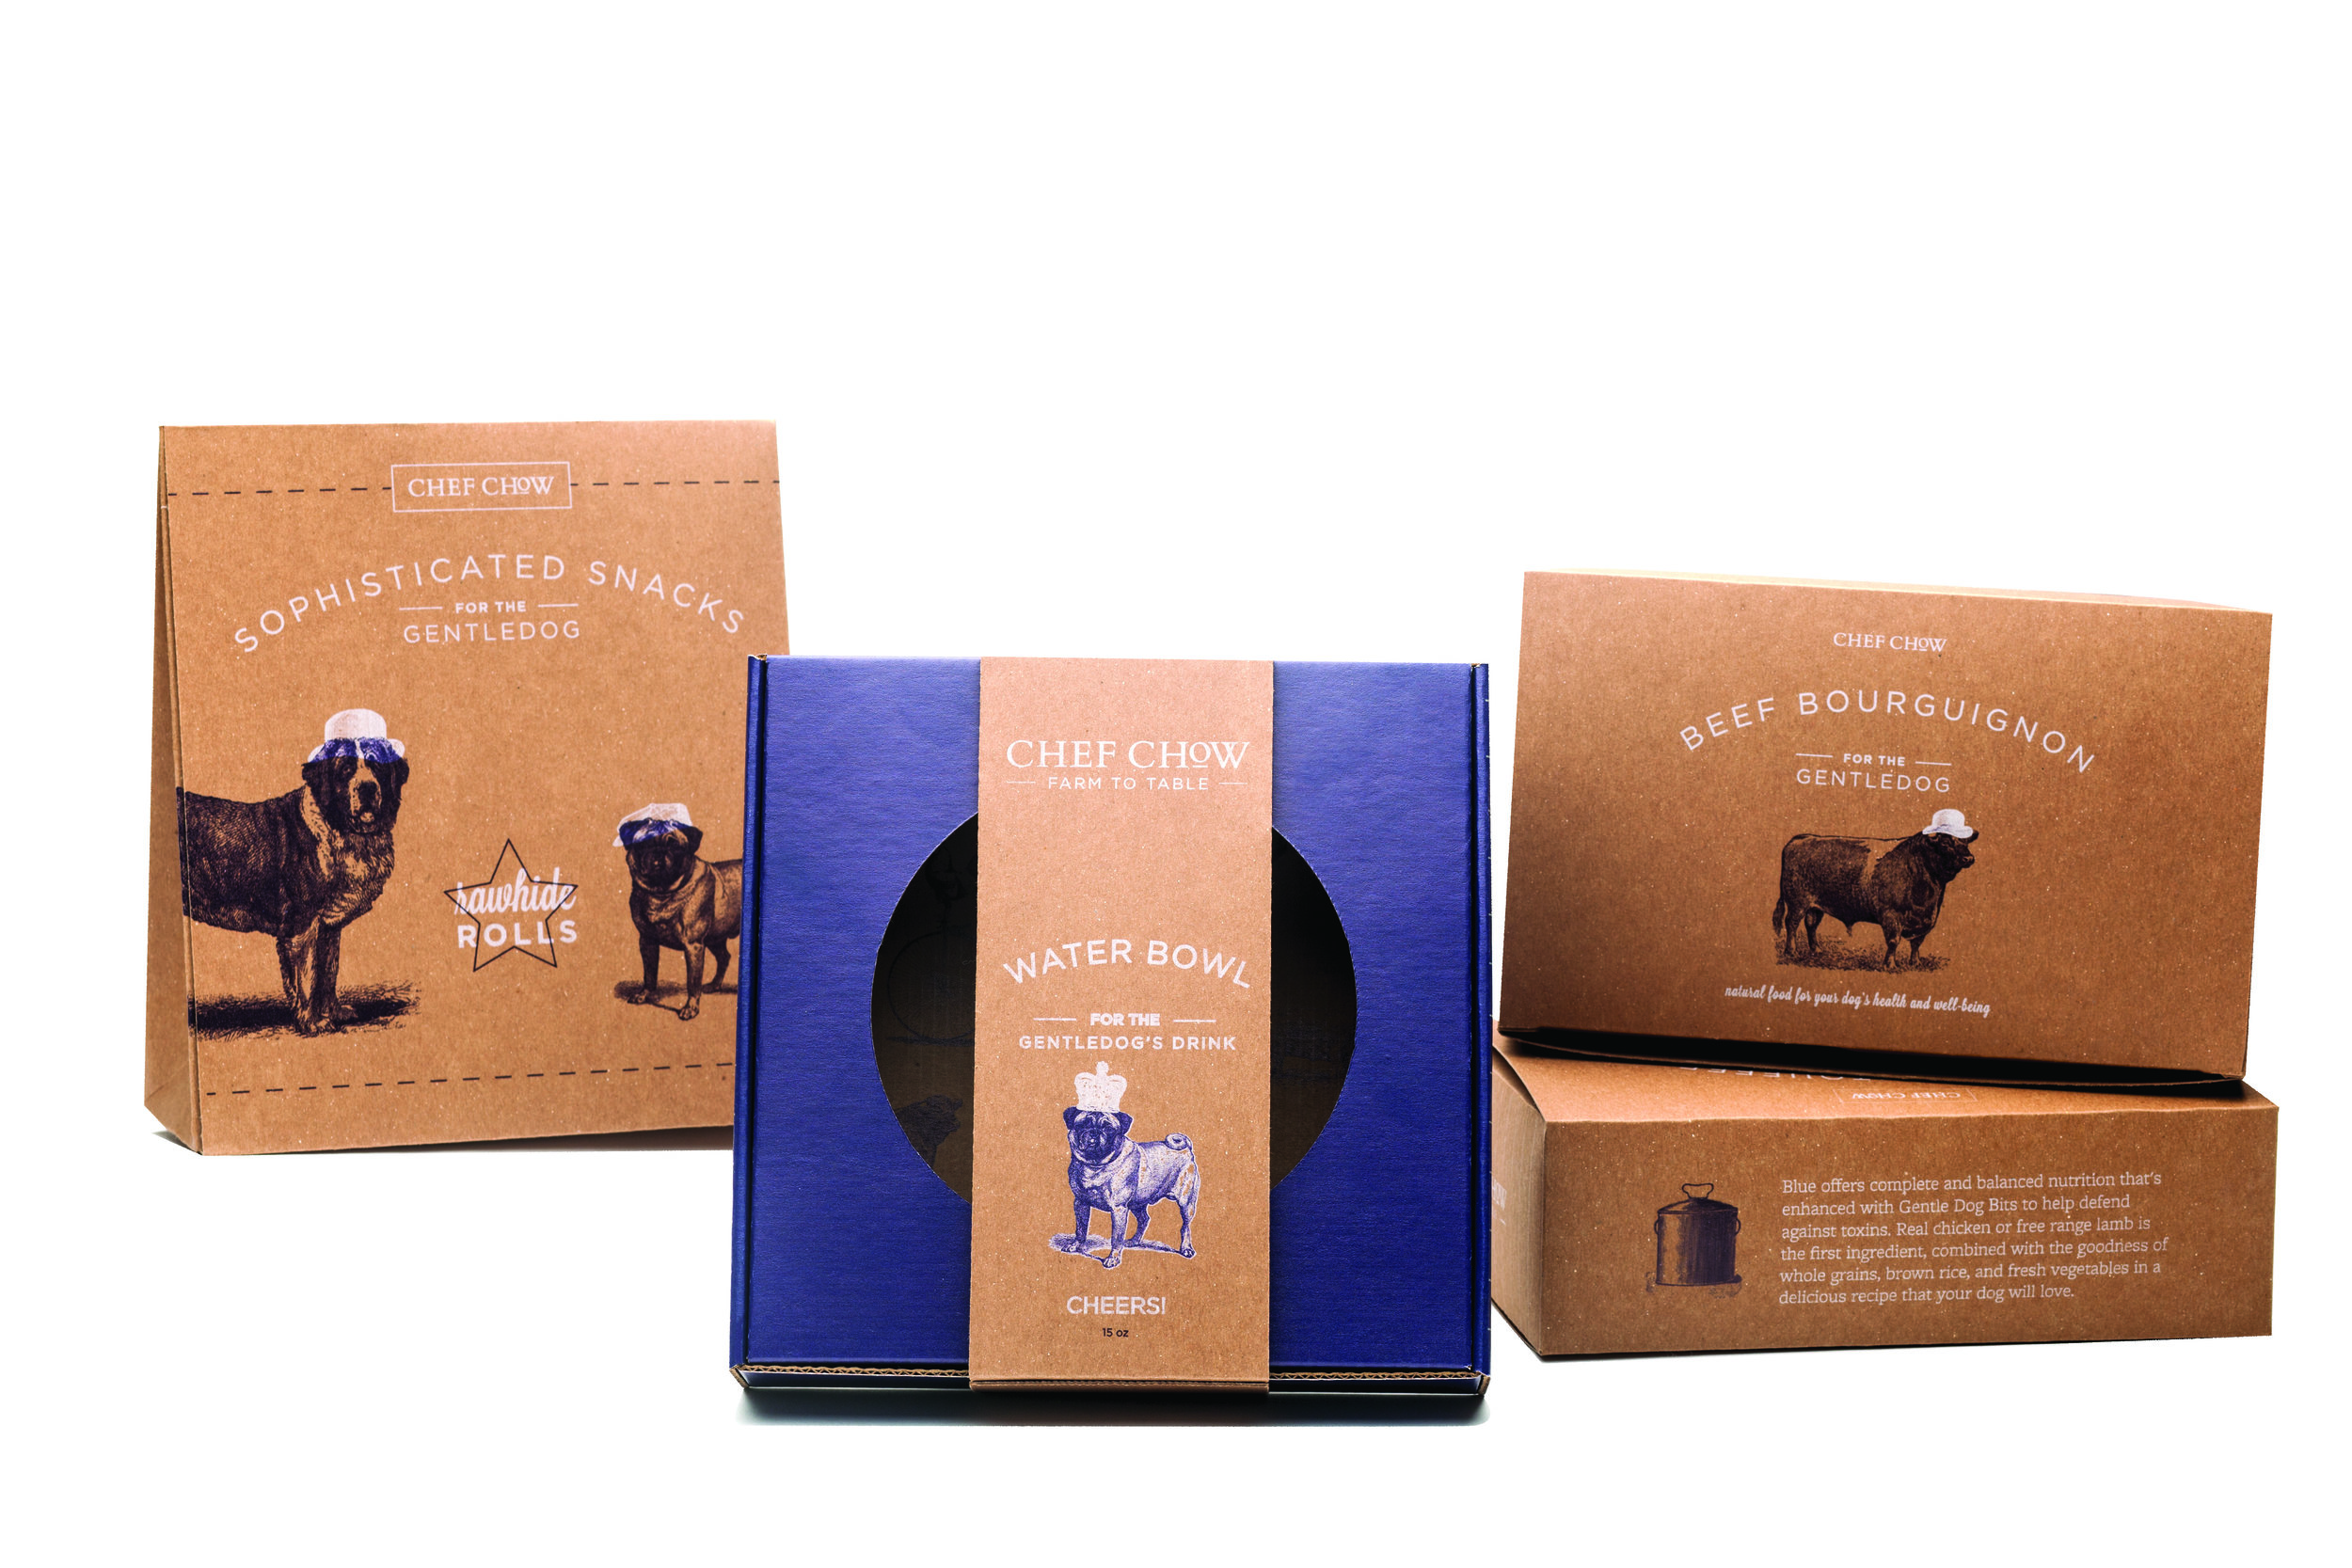 Branding and Structural Packaging Design for Premium Farm-To-Table Mail Order Dog Food Company